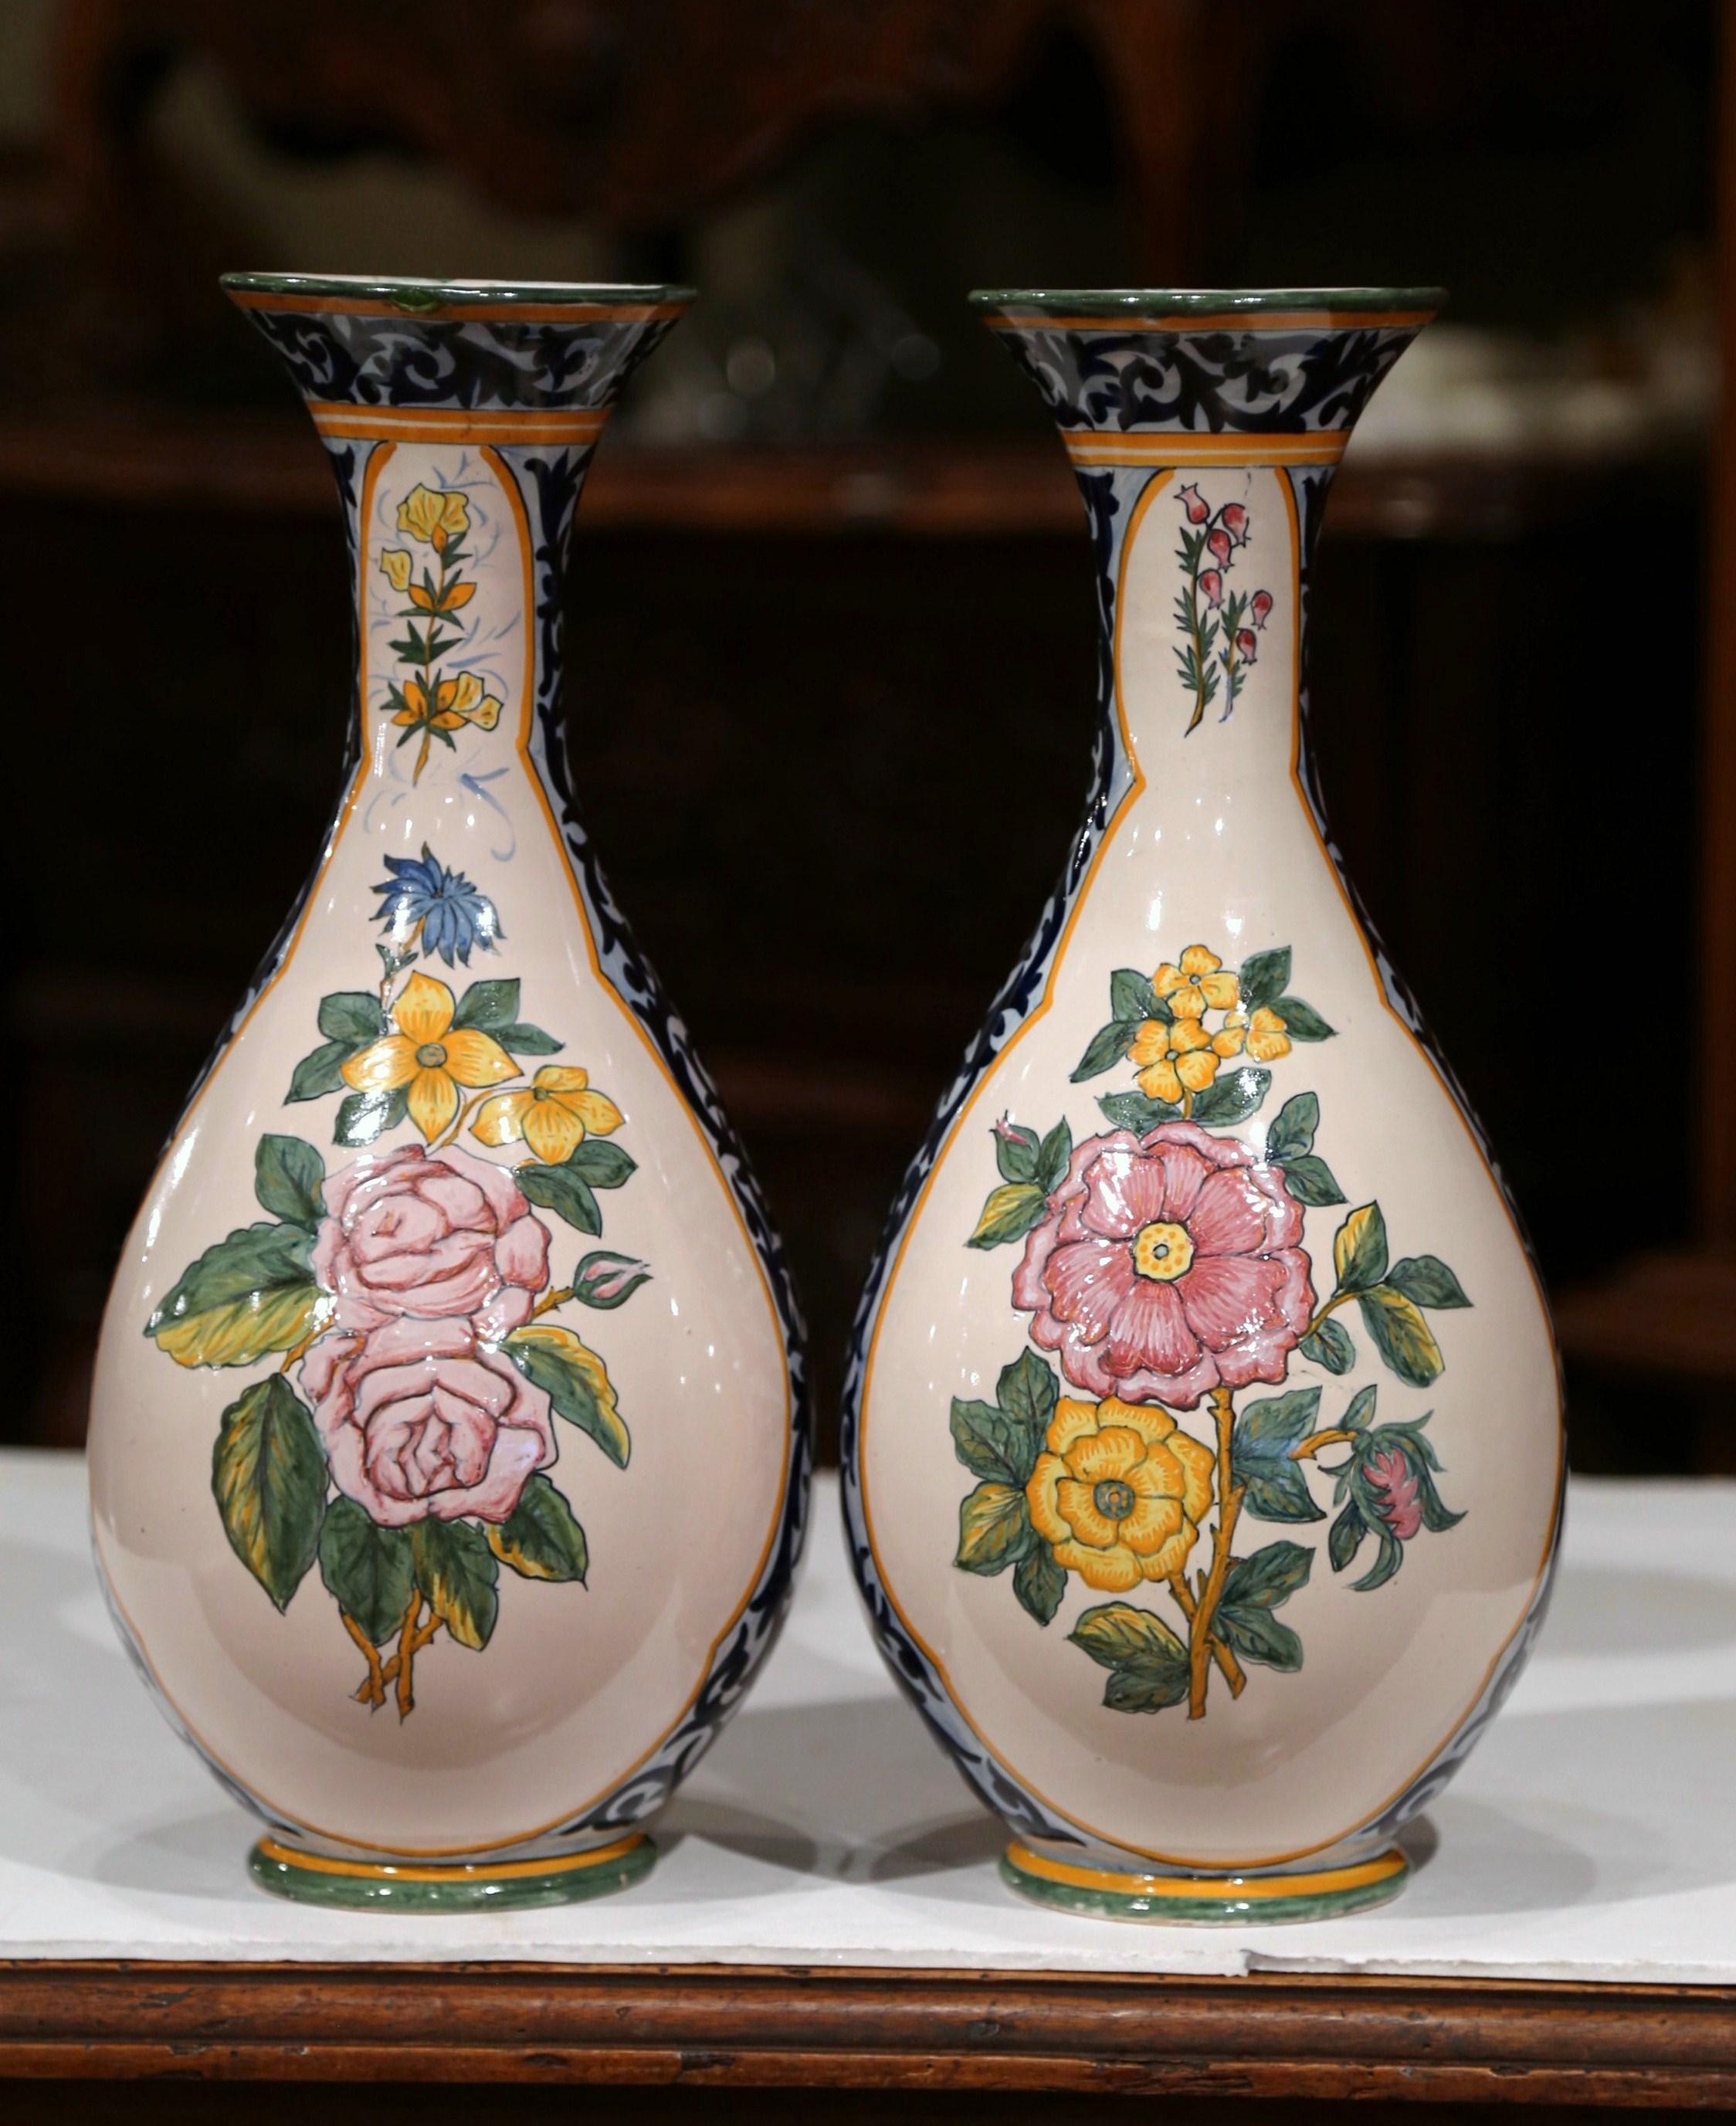 Ceramic Pair of 19th Century French Hand Painted Faience Vases Signed Henriot Quimper